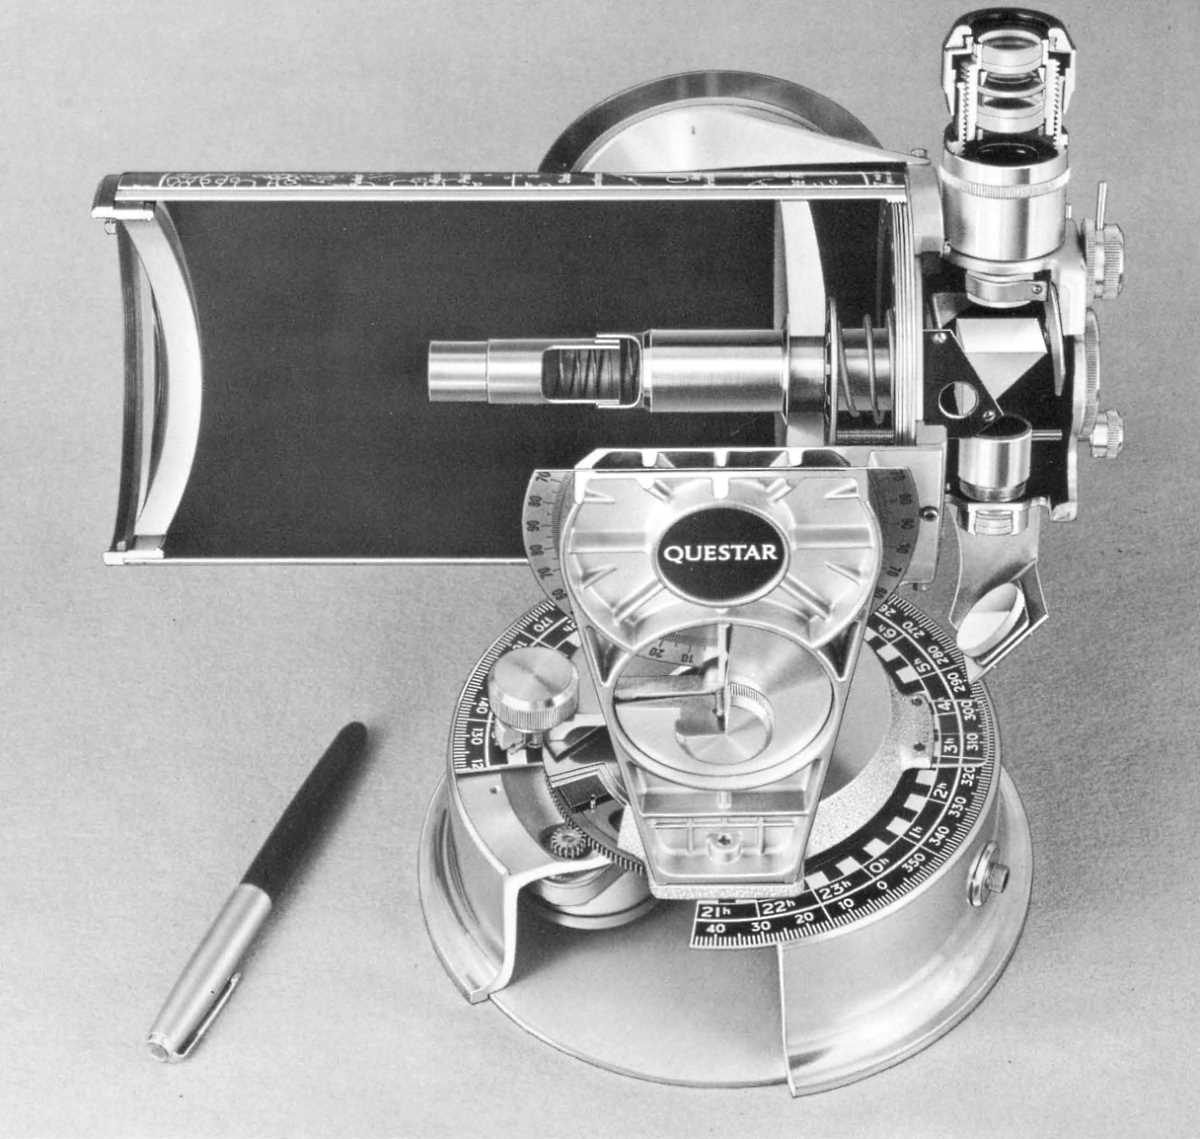 Side view of the cutaway Questar